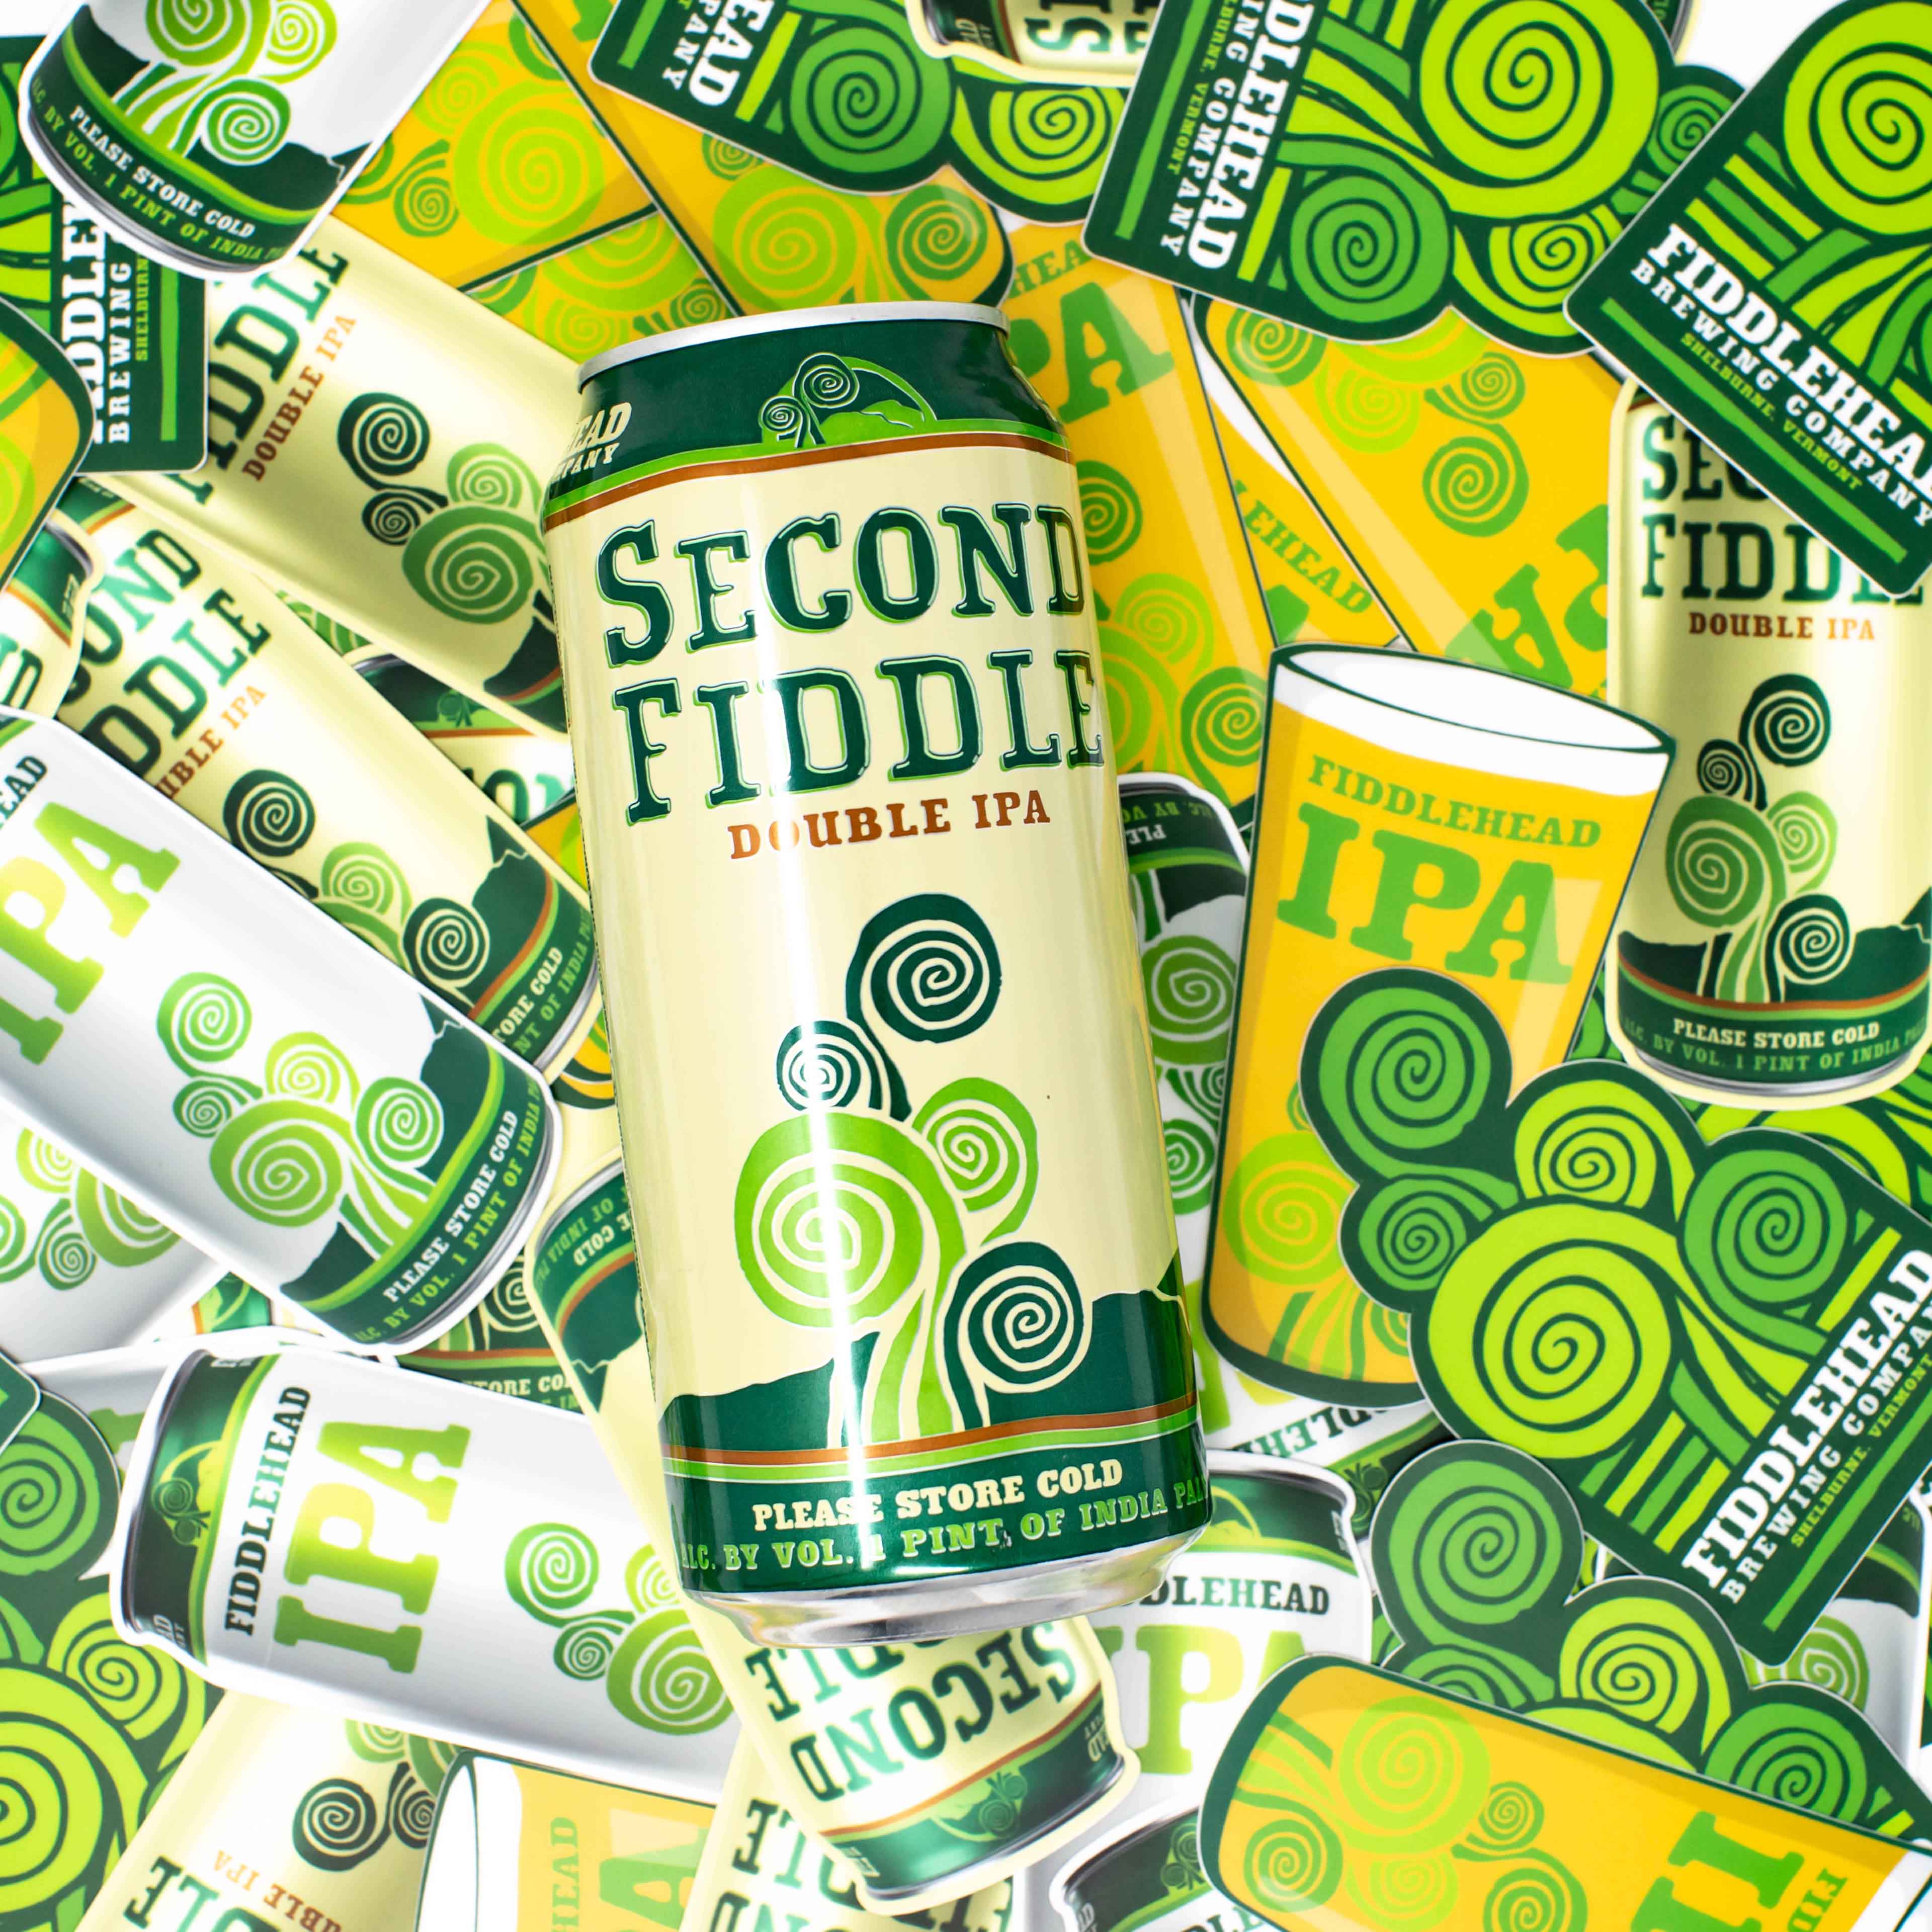 Collage of Second Fiddle Double IPA brewery stickers